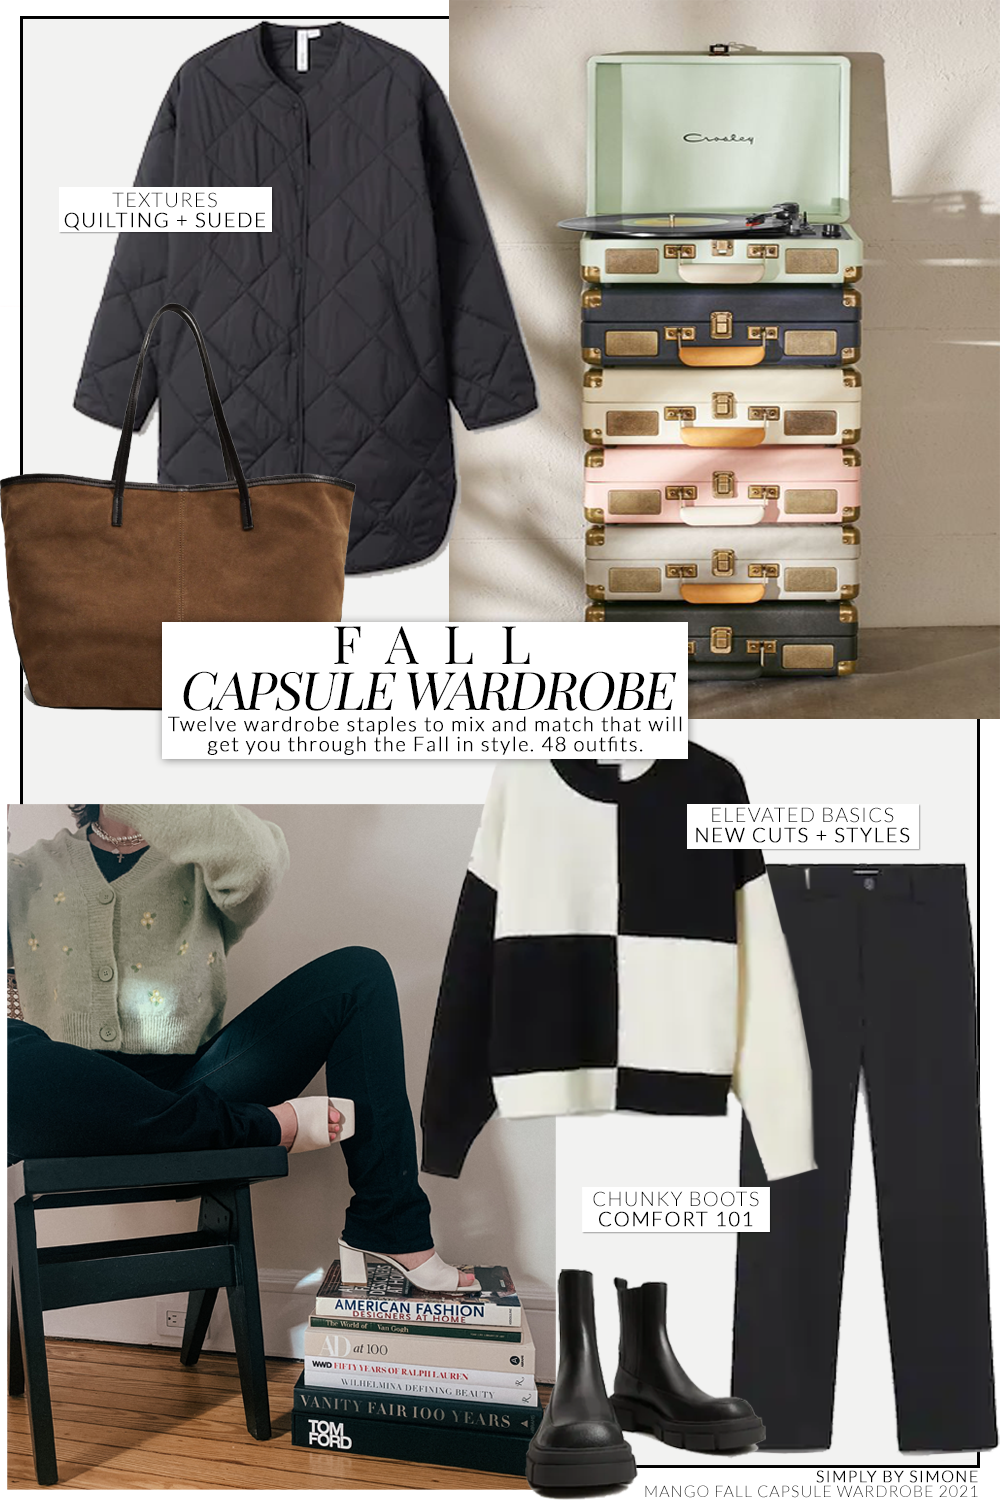 Mango Fall Capsule Wardrobe Items | 12 Pieces, 48 Outfits | How to Build a Capsule Wardrobe | Mango Clothing Fall Clothes | Outfit Inspiration | 48 Fall Weather Outfit Ideas | Fall Vacation Packing Guide | Mango Clothing Fall Capsule Wardrobe| What To Wear this Fall 2021 | Simply by Simone | Conscious Mango Fall Capsule Wardrobe | What To Wear This Fall 2021